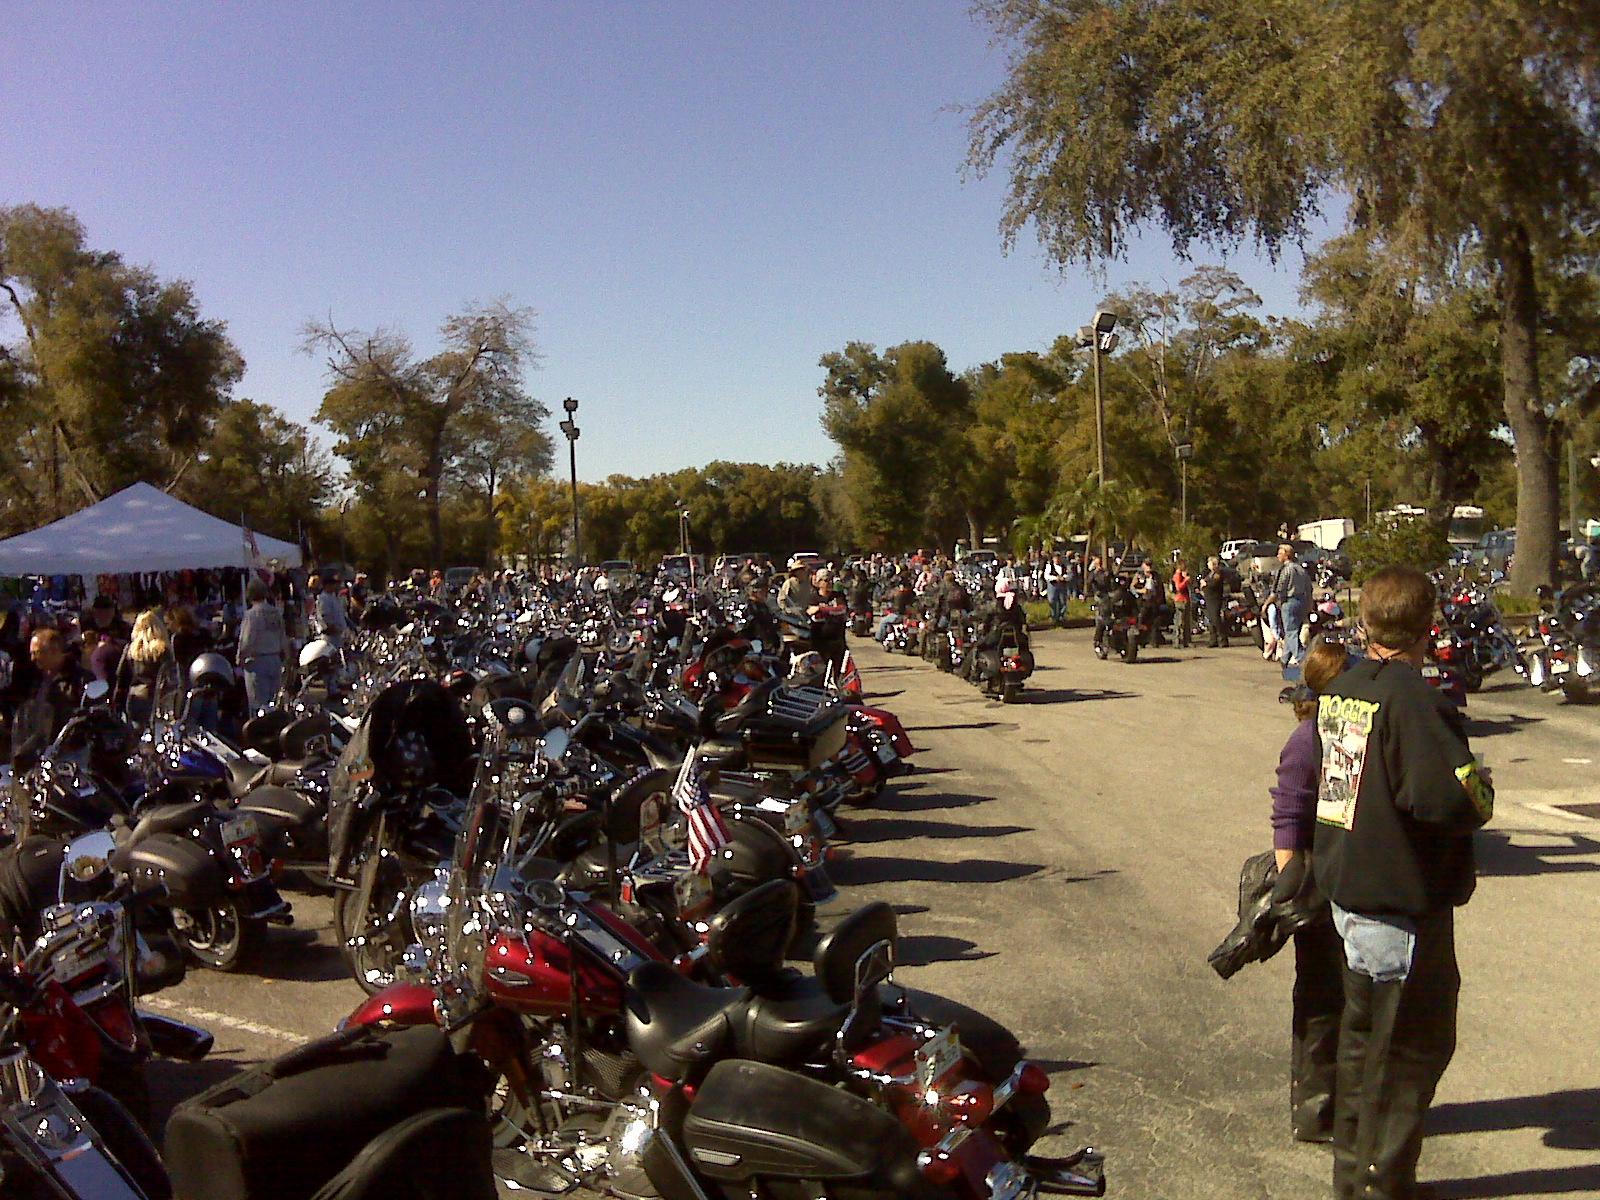 Bikes at the Chrome Angels Pink Ribbon breast cancer event